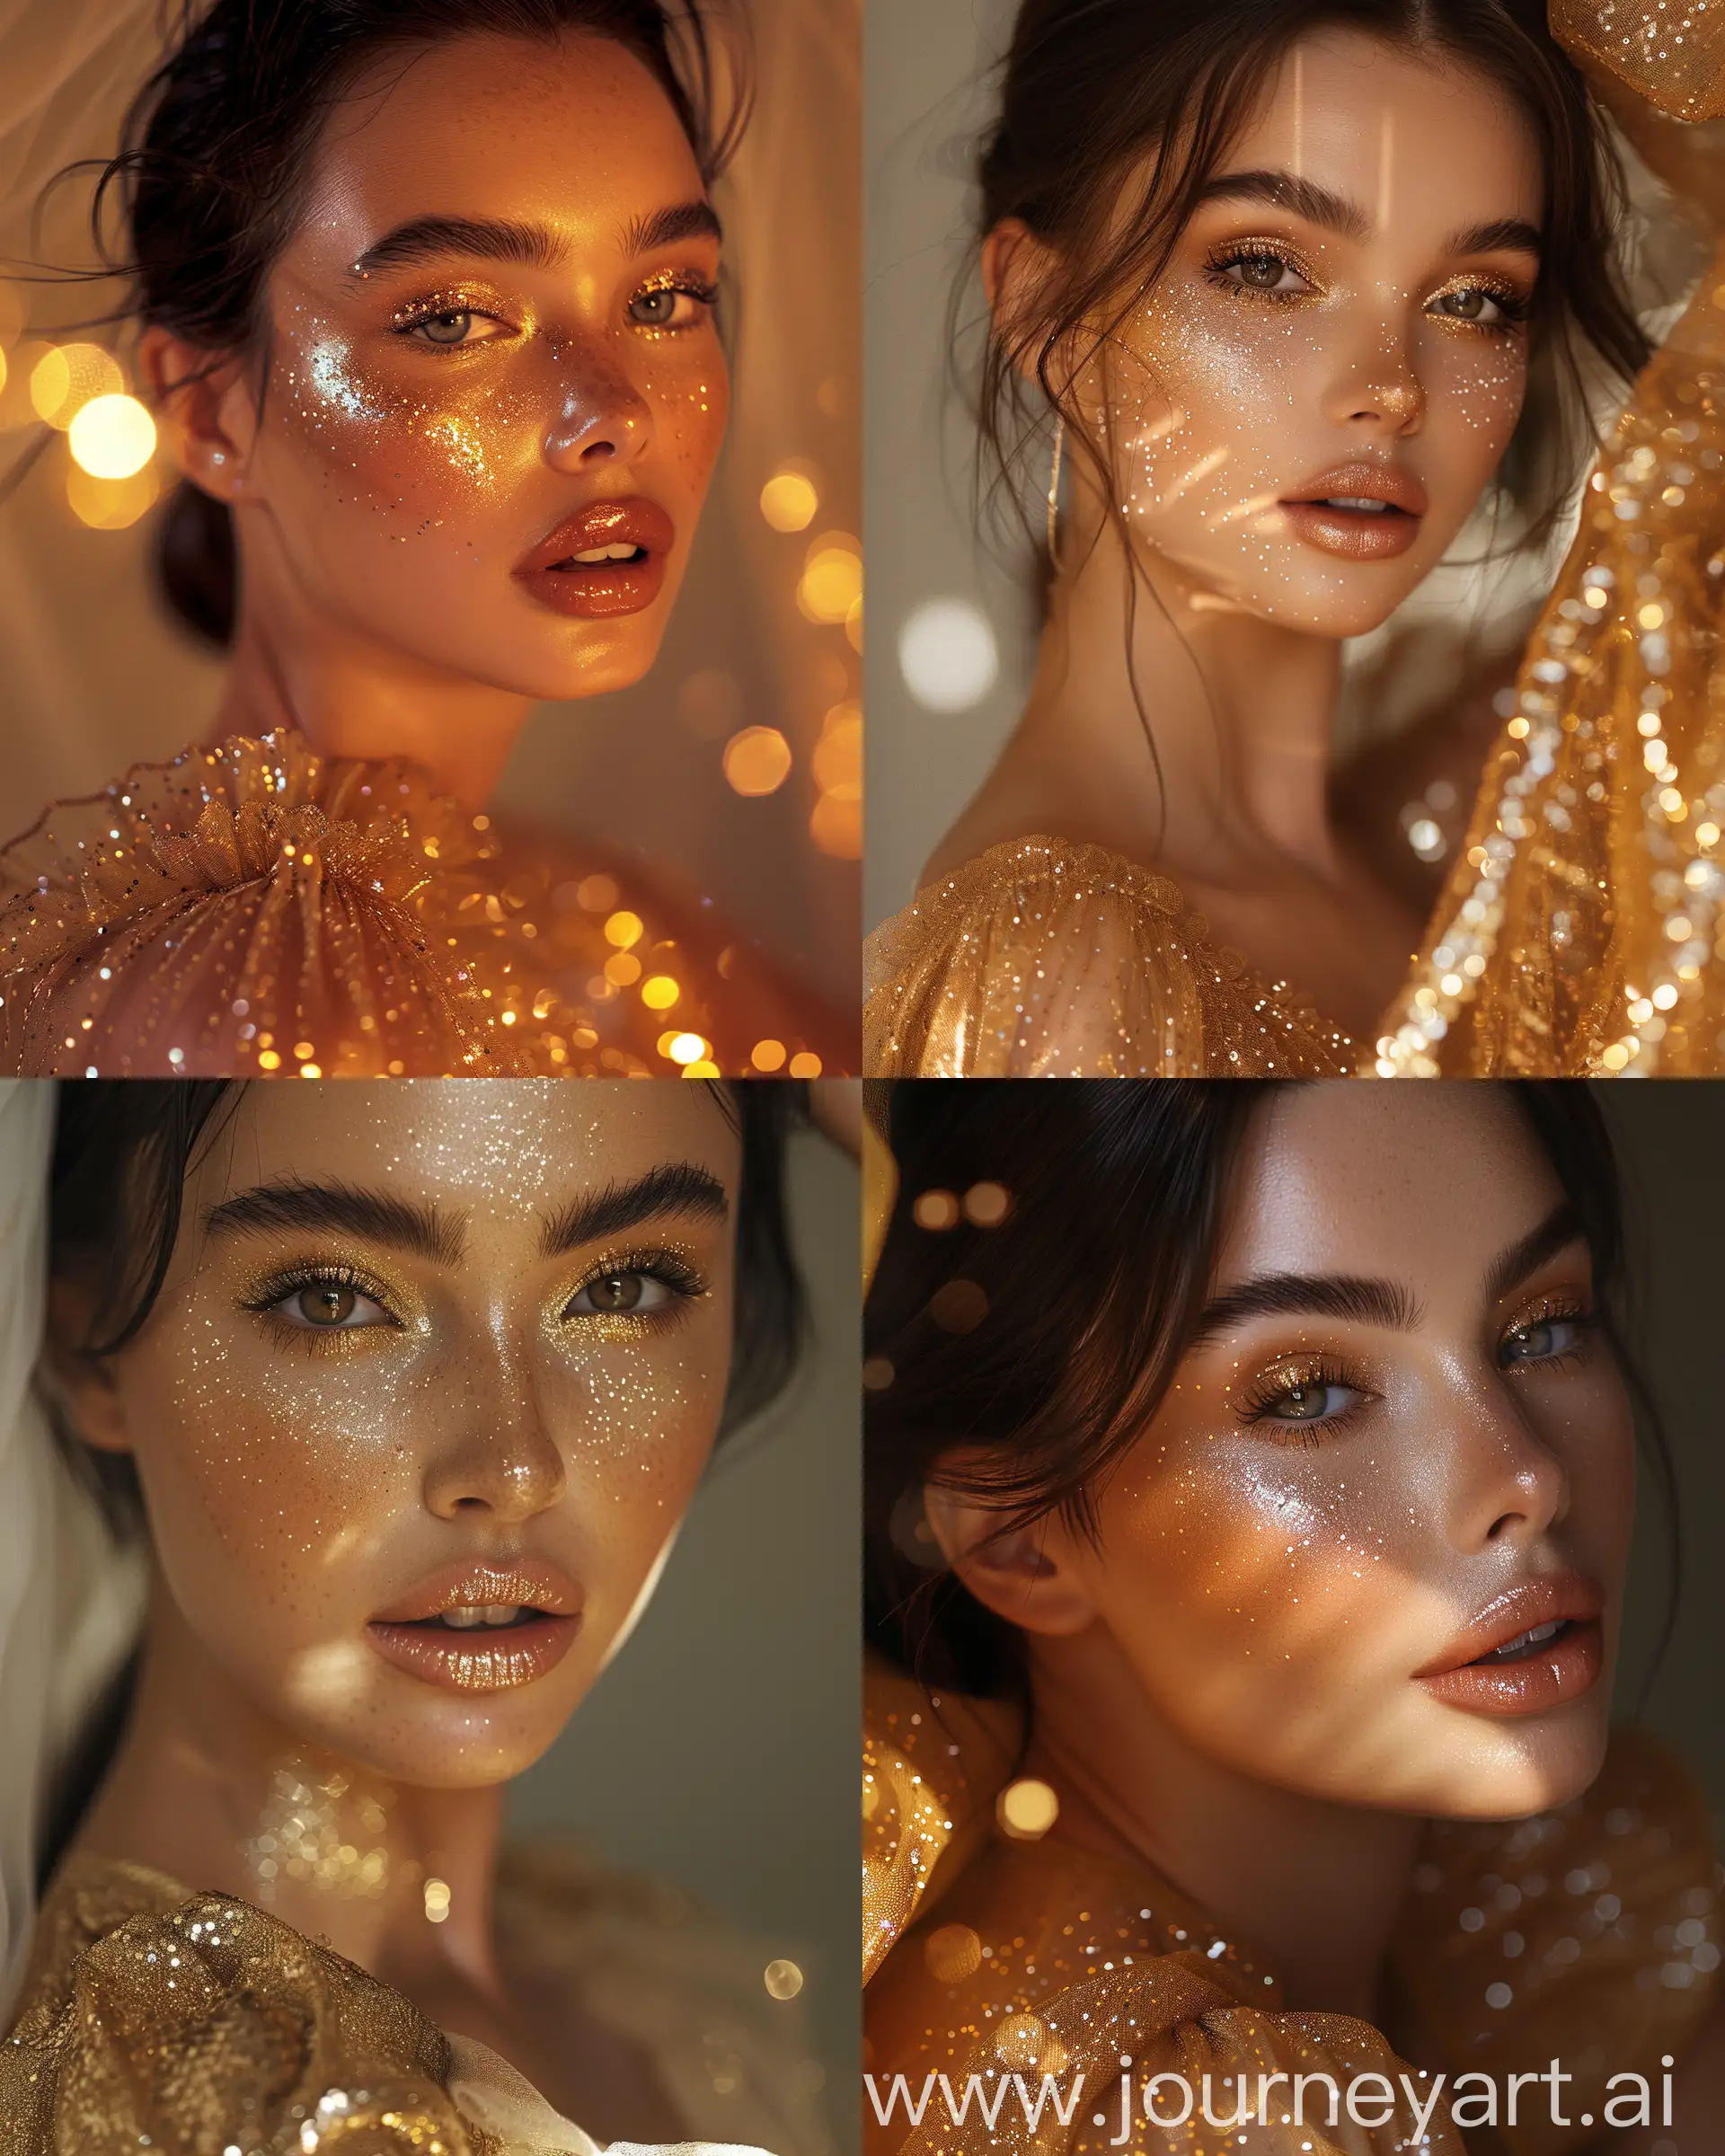 Glamorous-Model-in-Sparkling-Gold-Outfit-with-Flawless-Makeup